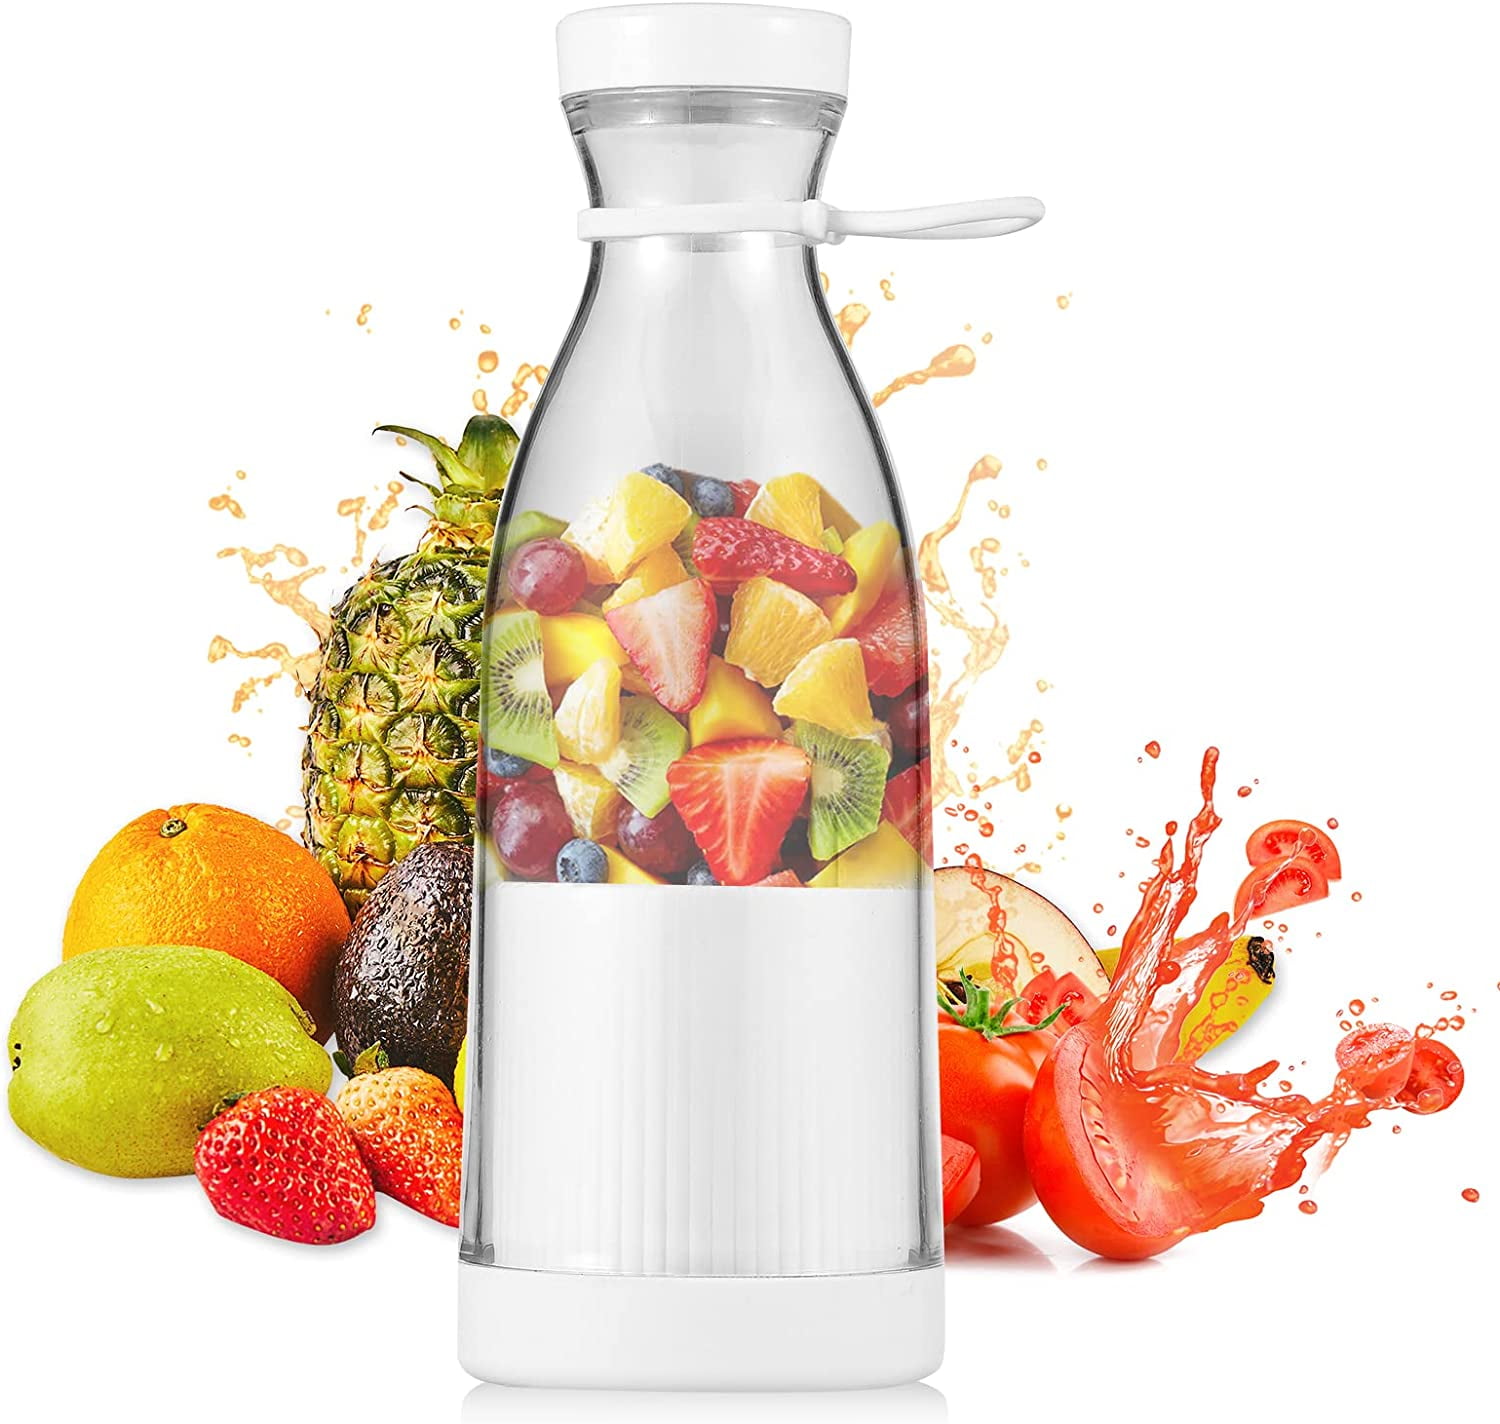  Smoothie Blender with 6 Sharp Blades, Personal Mini